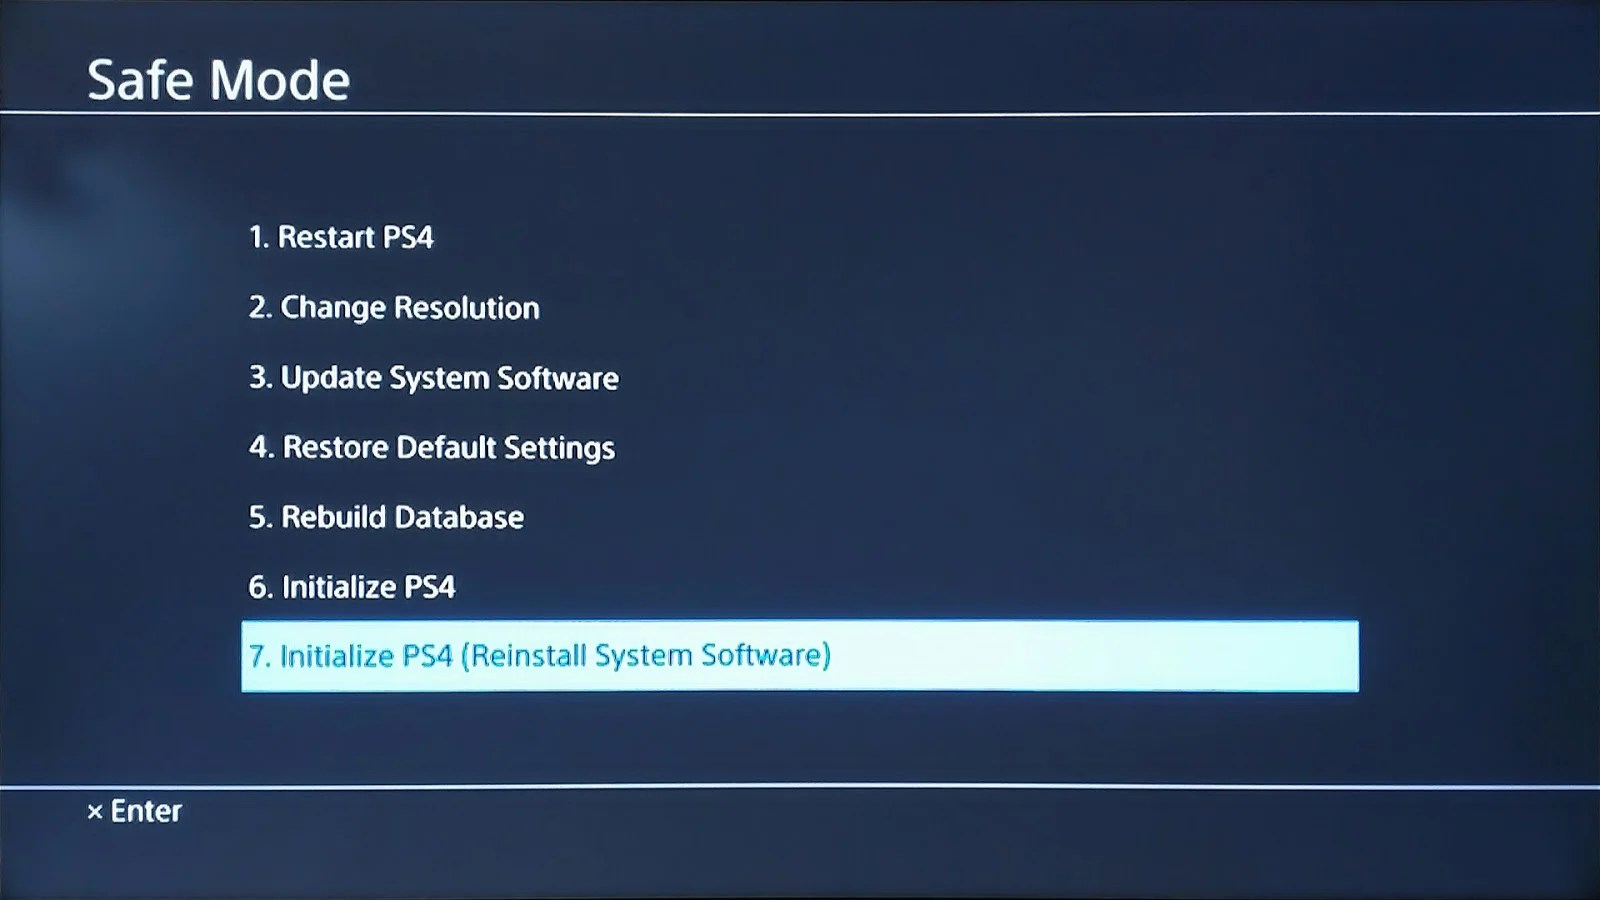 initialize PS4 to fix PS4 slowness